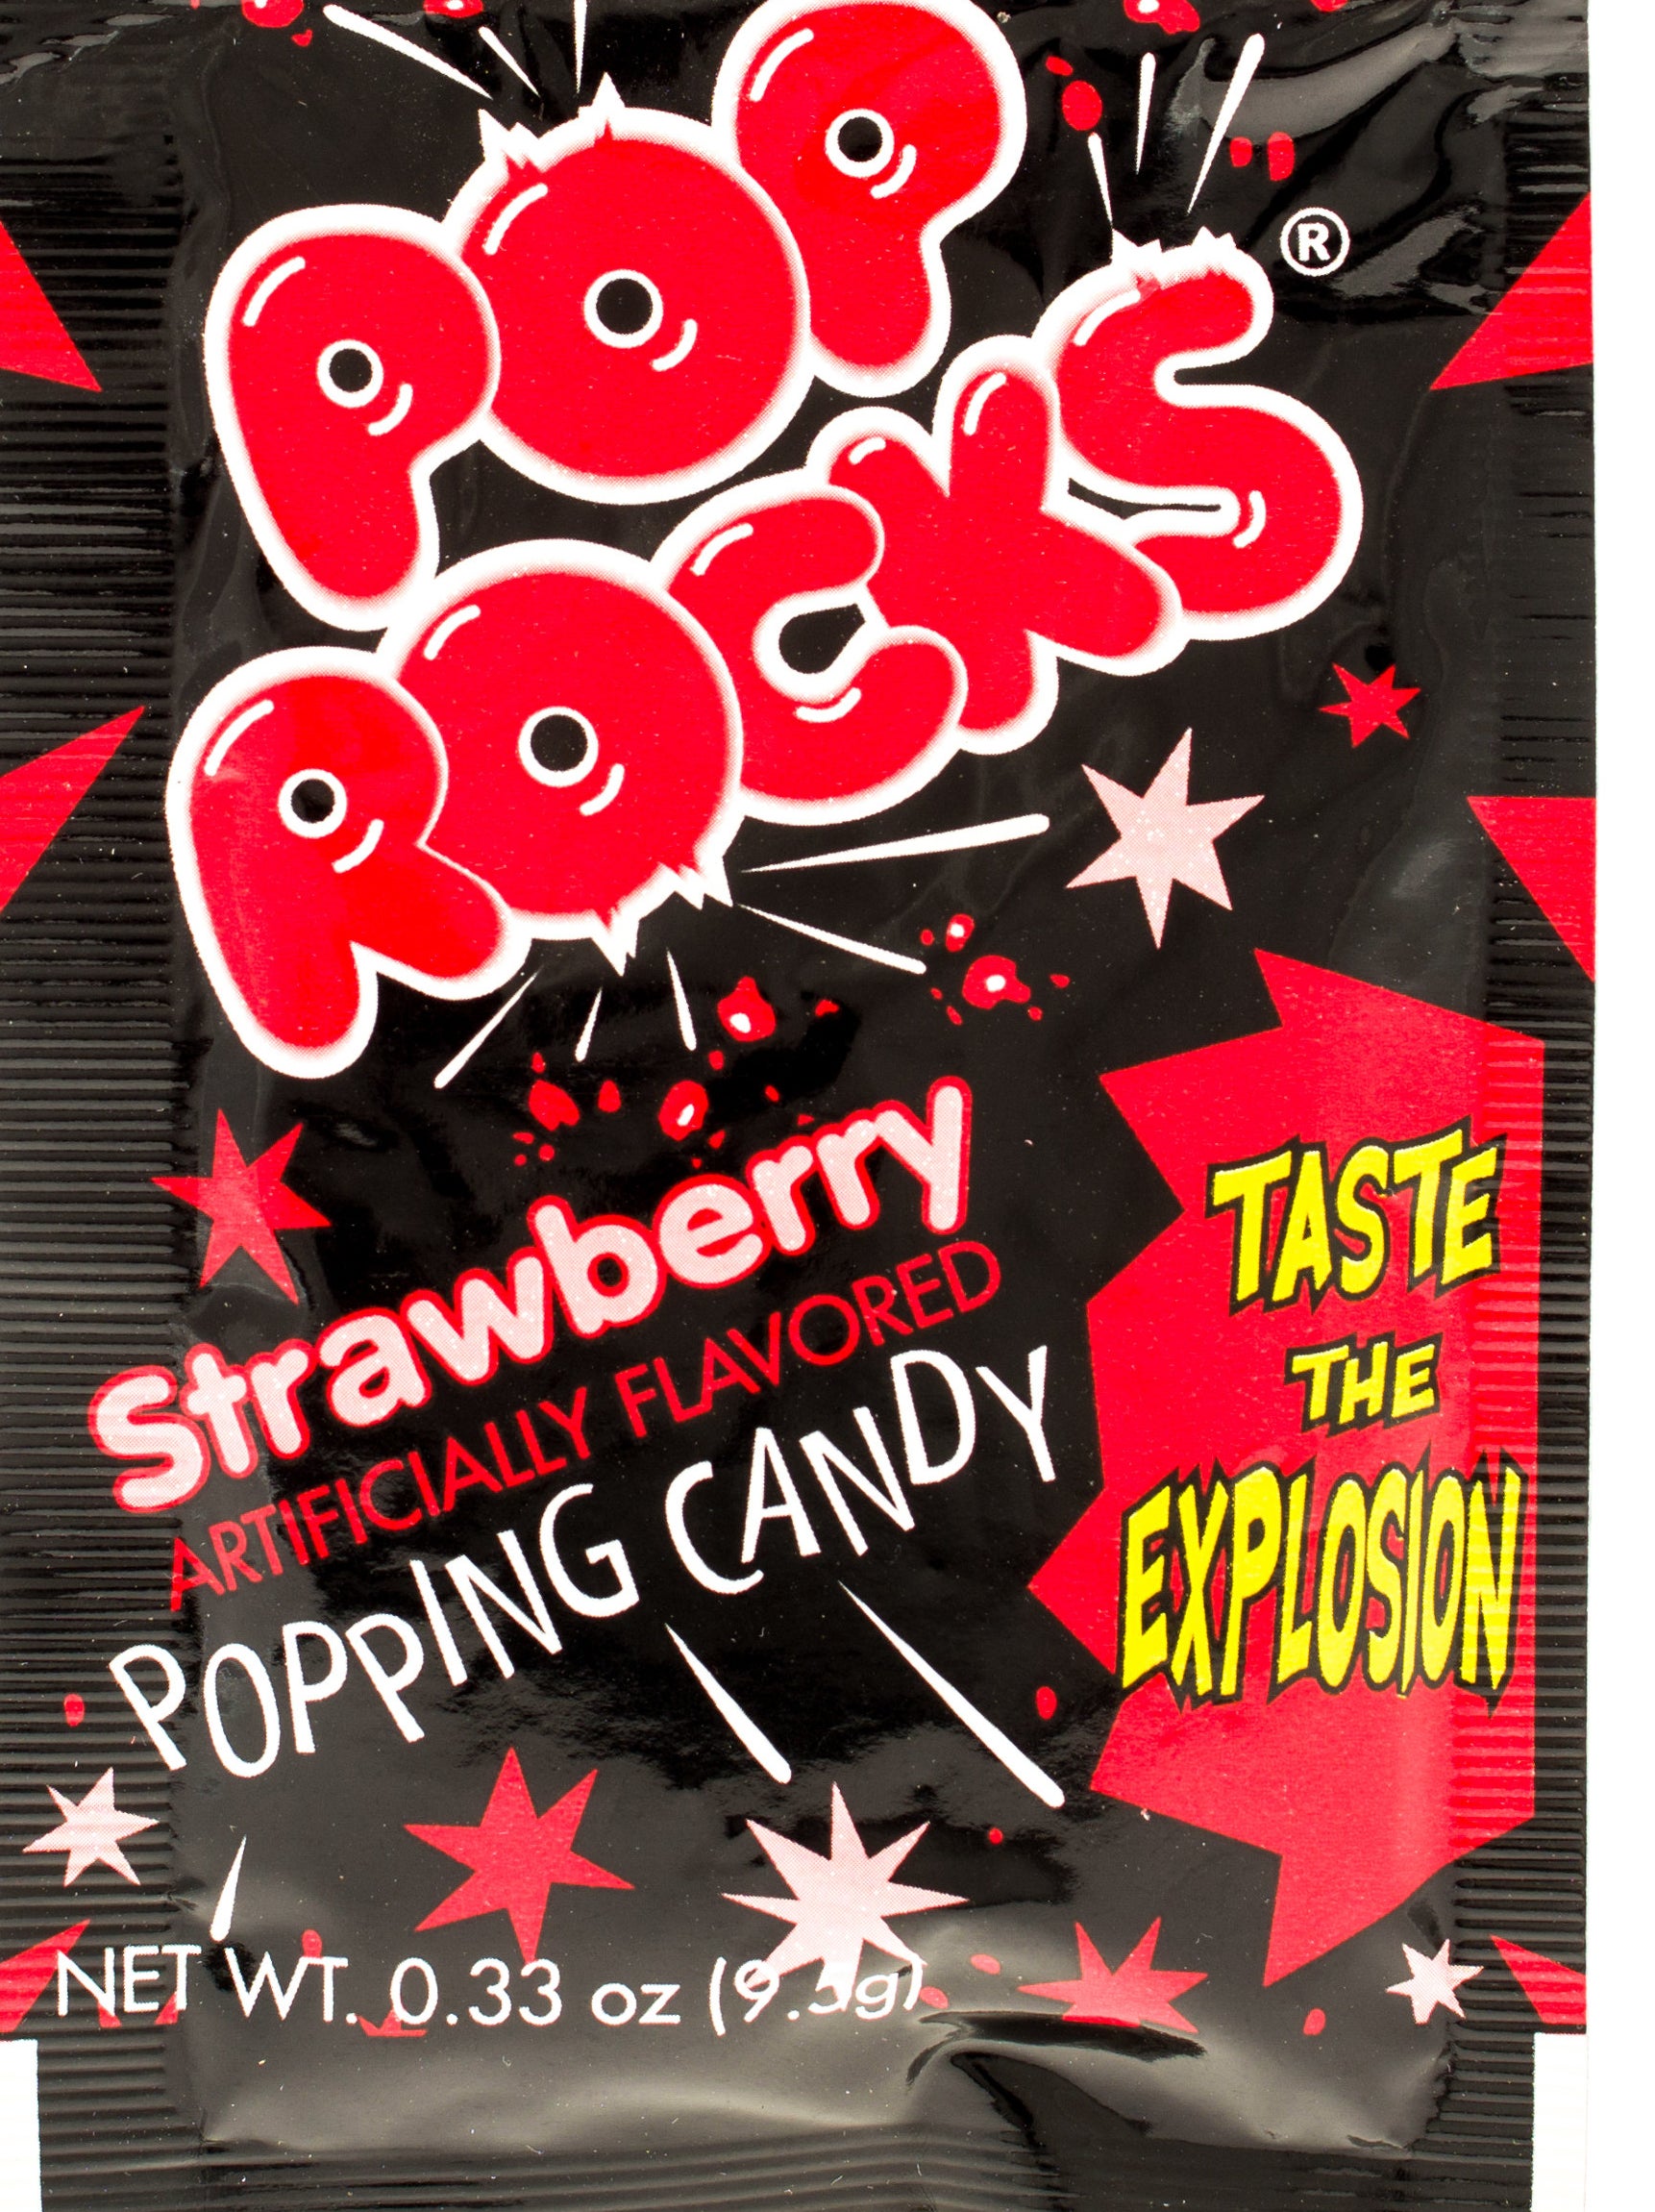 A strawberry-flavored pack of Pop Rocks